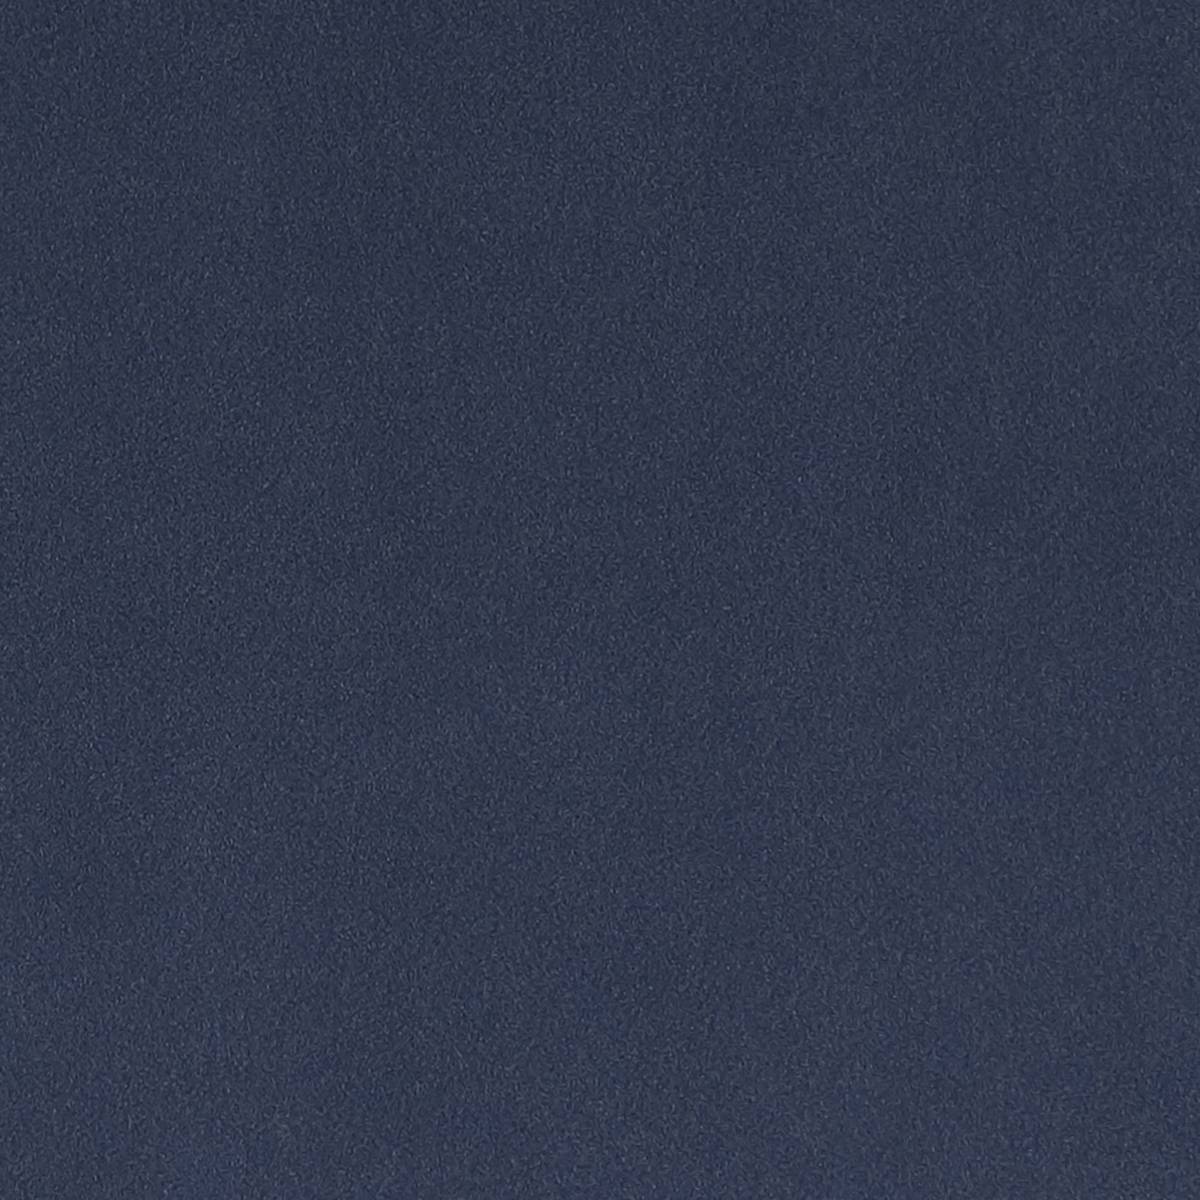 Lucca Navy Fabric by Studio G